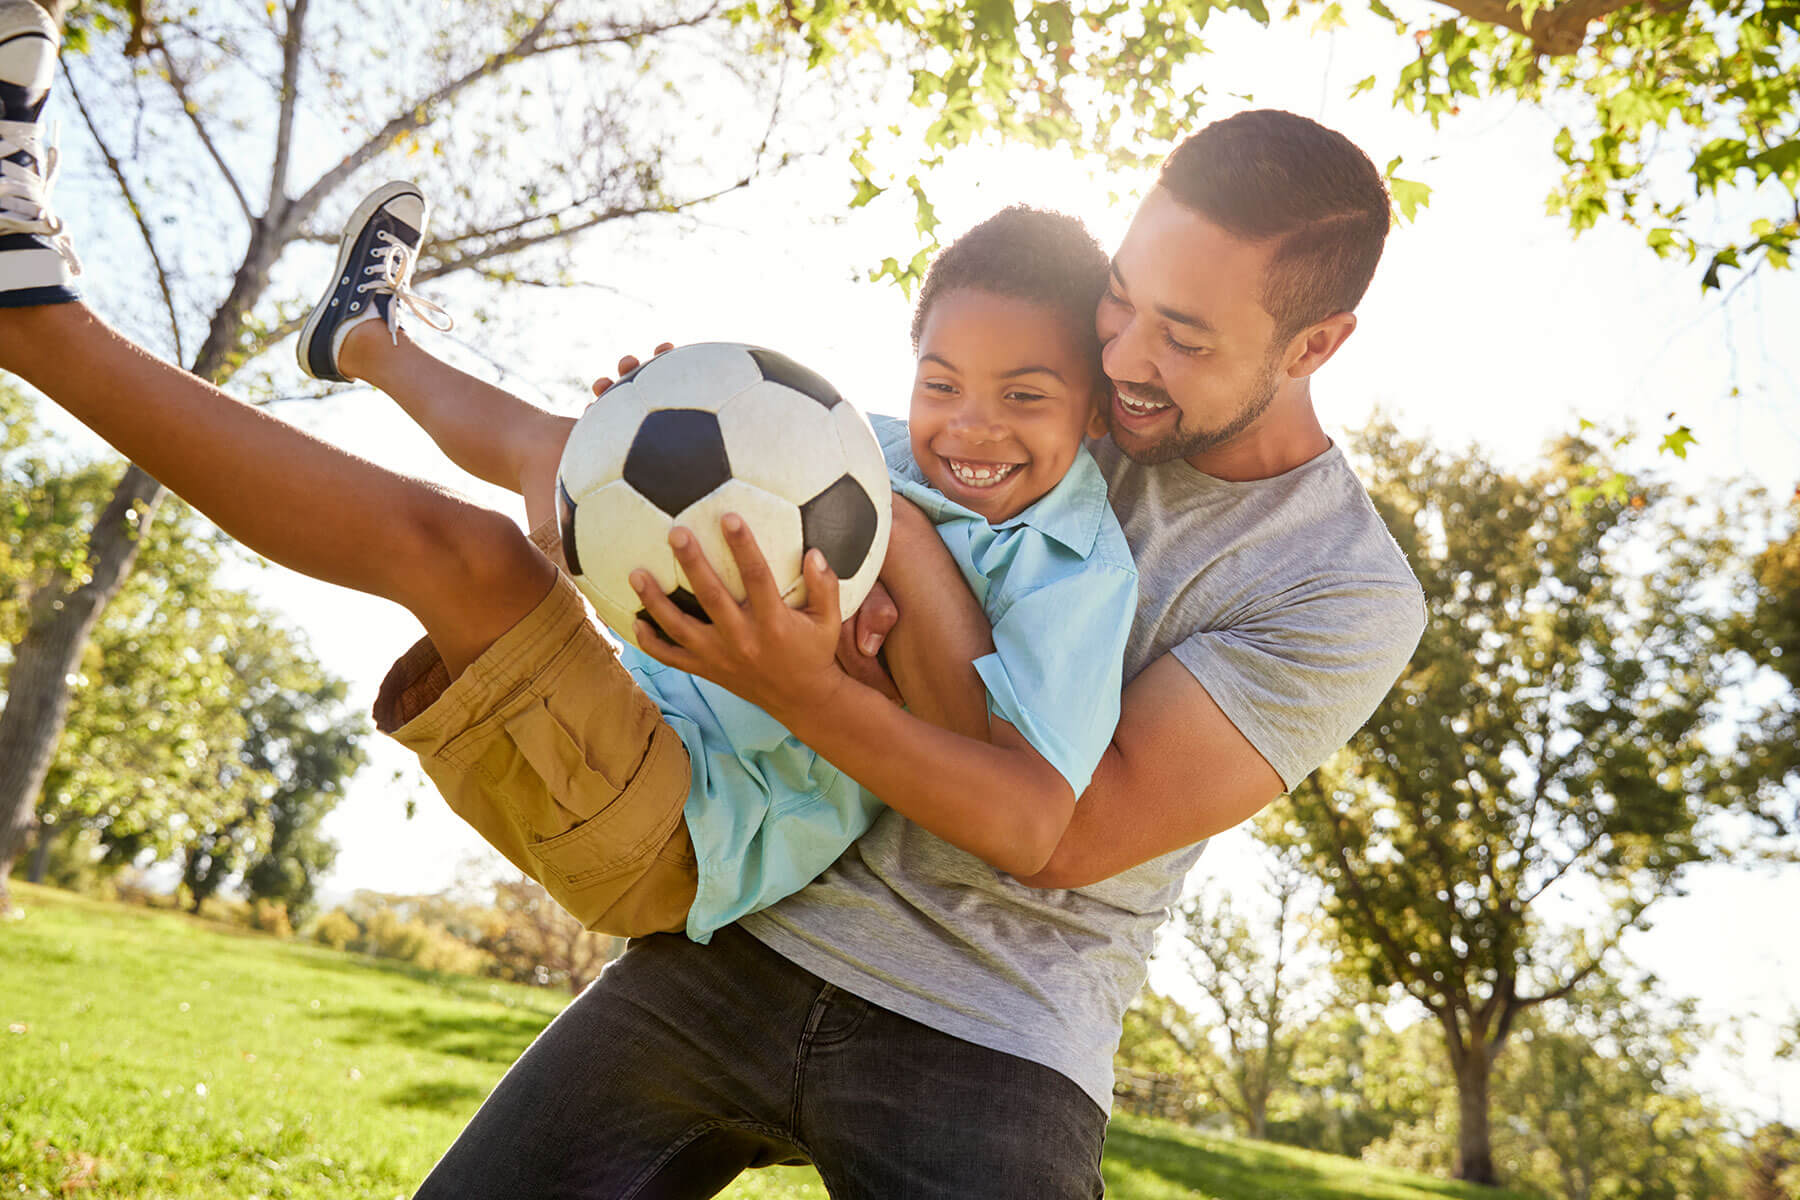 Boy holding a soccer ball getting picked up by his dad in a park